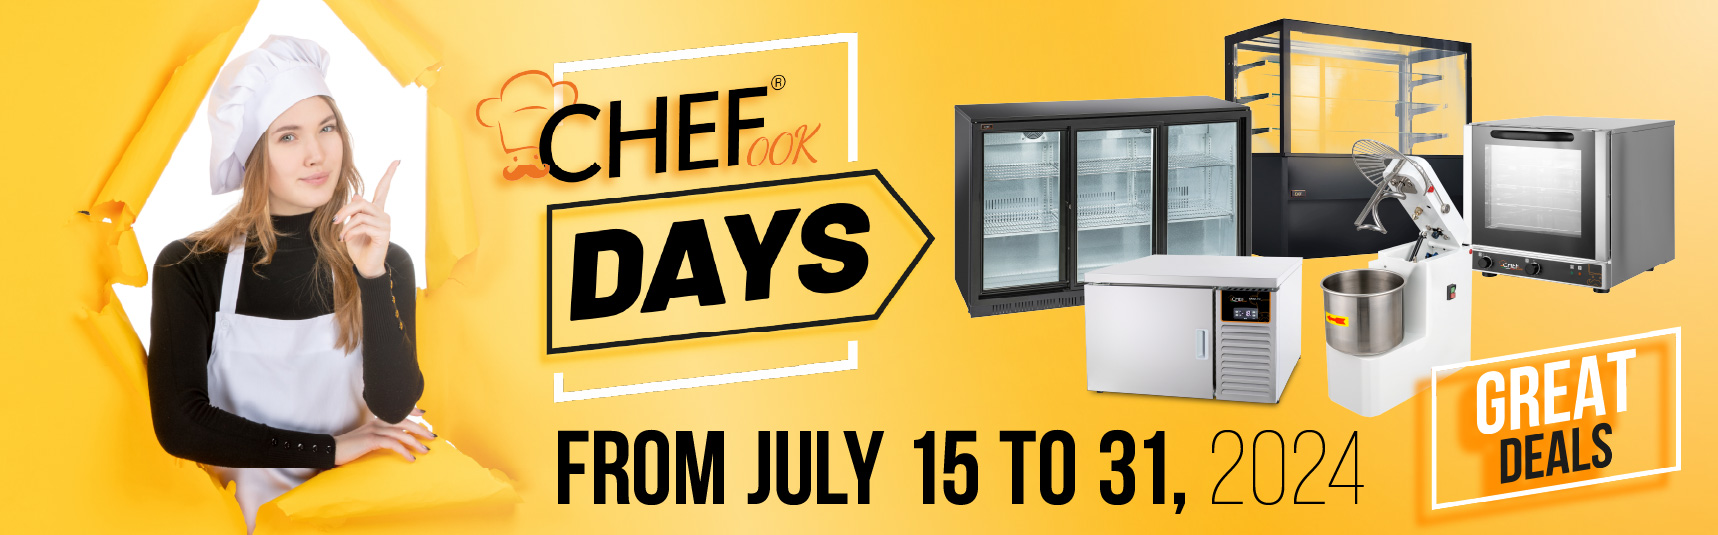 ChefOok Days: From July 15 to 31, 15 days of unmissable discounts!